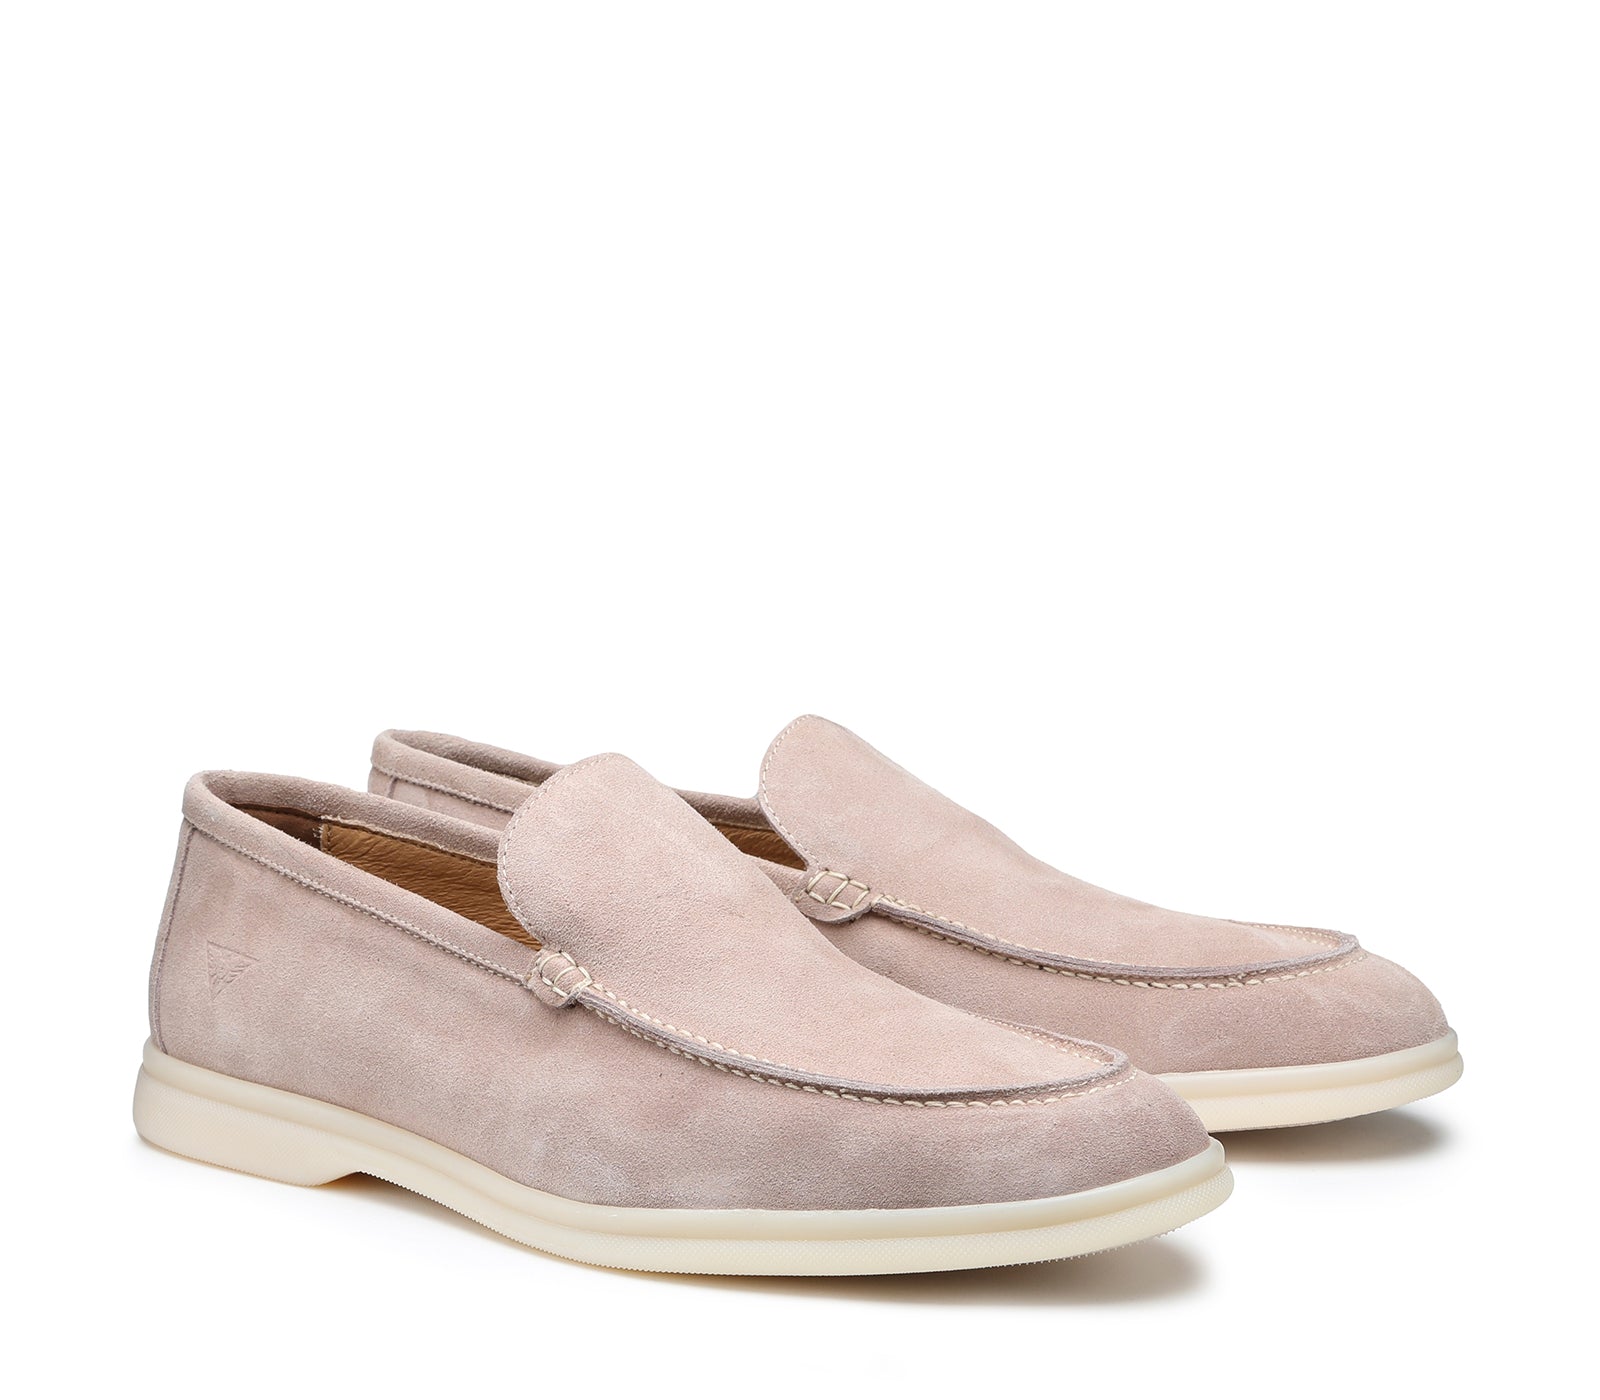 Sand-colored Suede Men's Moccasin 